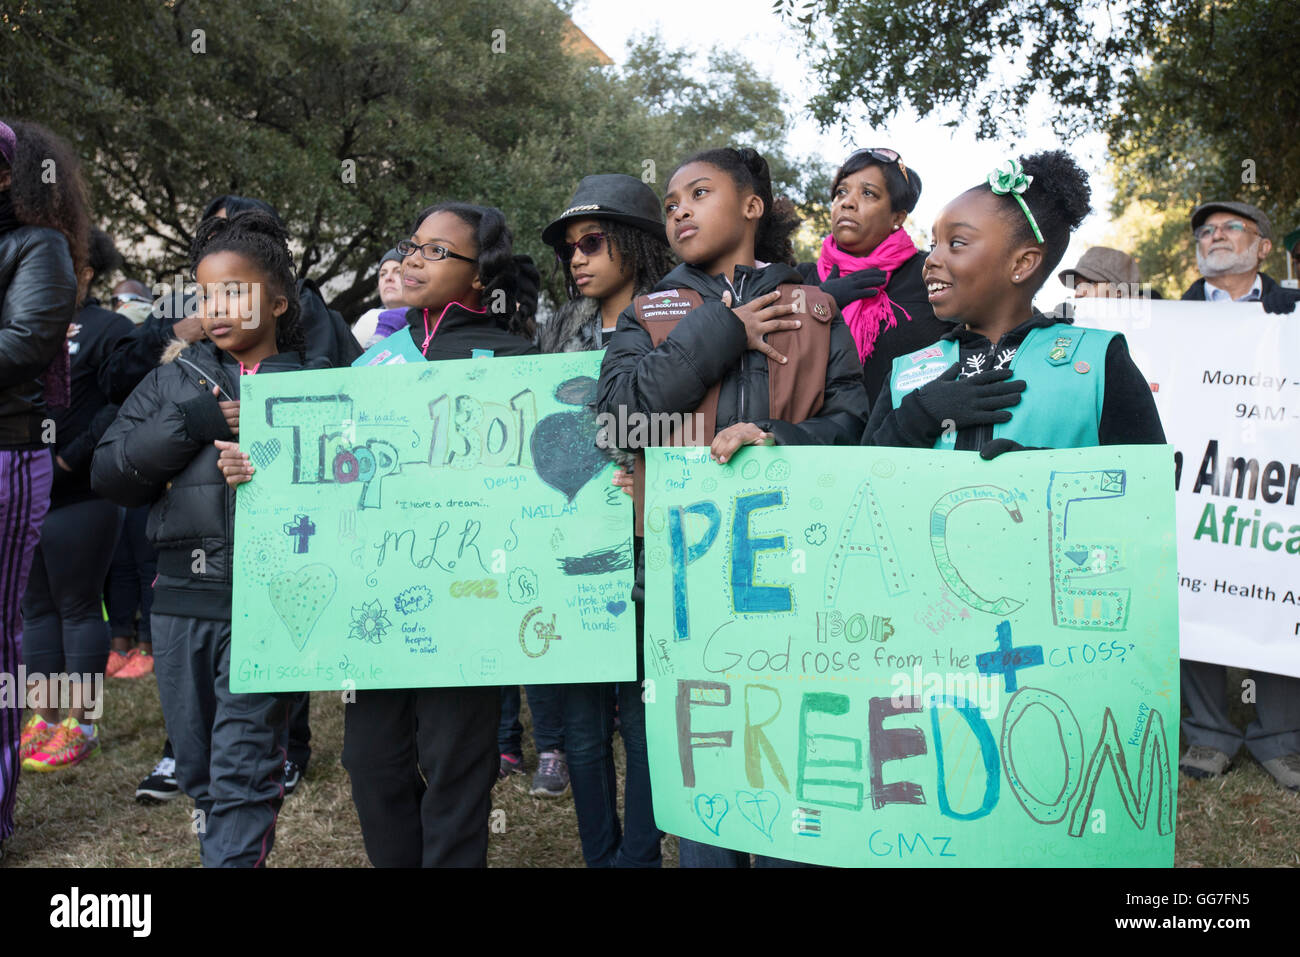 Black Girl Scouts hold signs paying tribute to Martin Luther King's messages of peace and freedom at MLK Day march in Austin TX Stock Photo